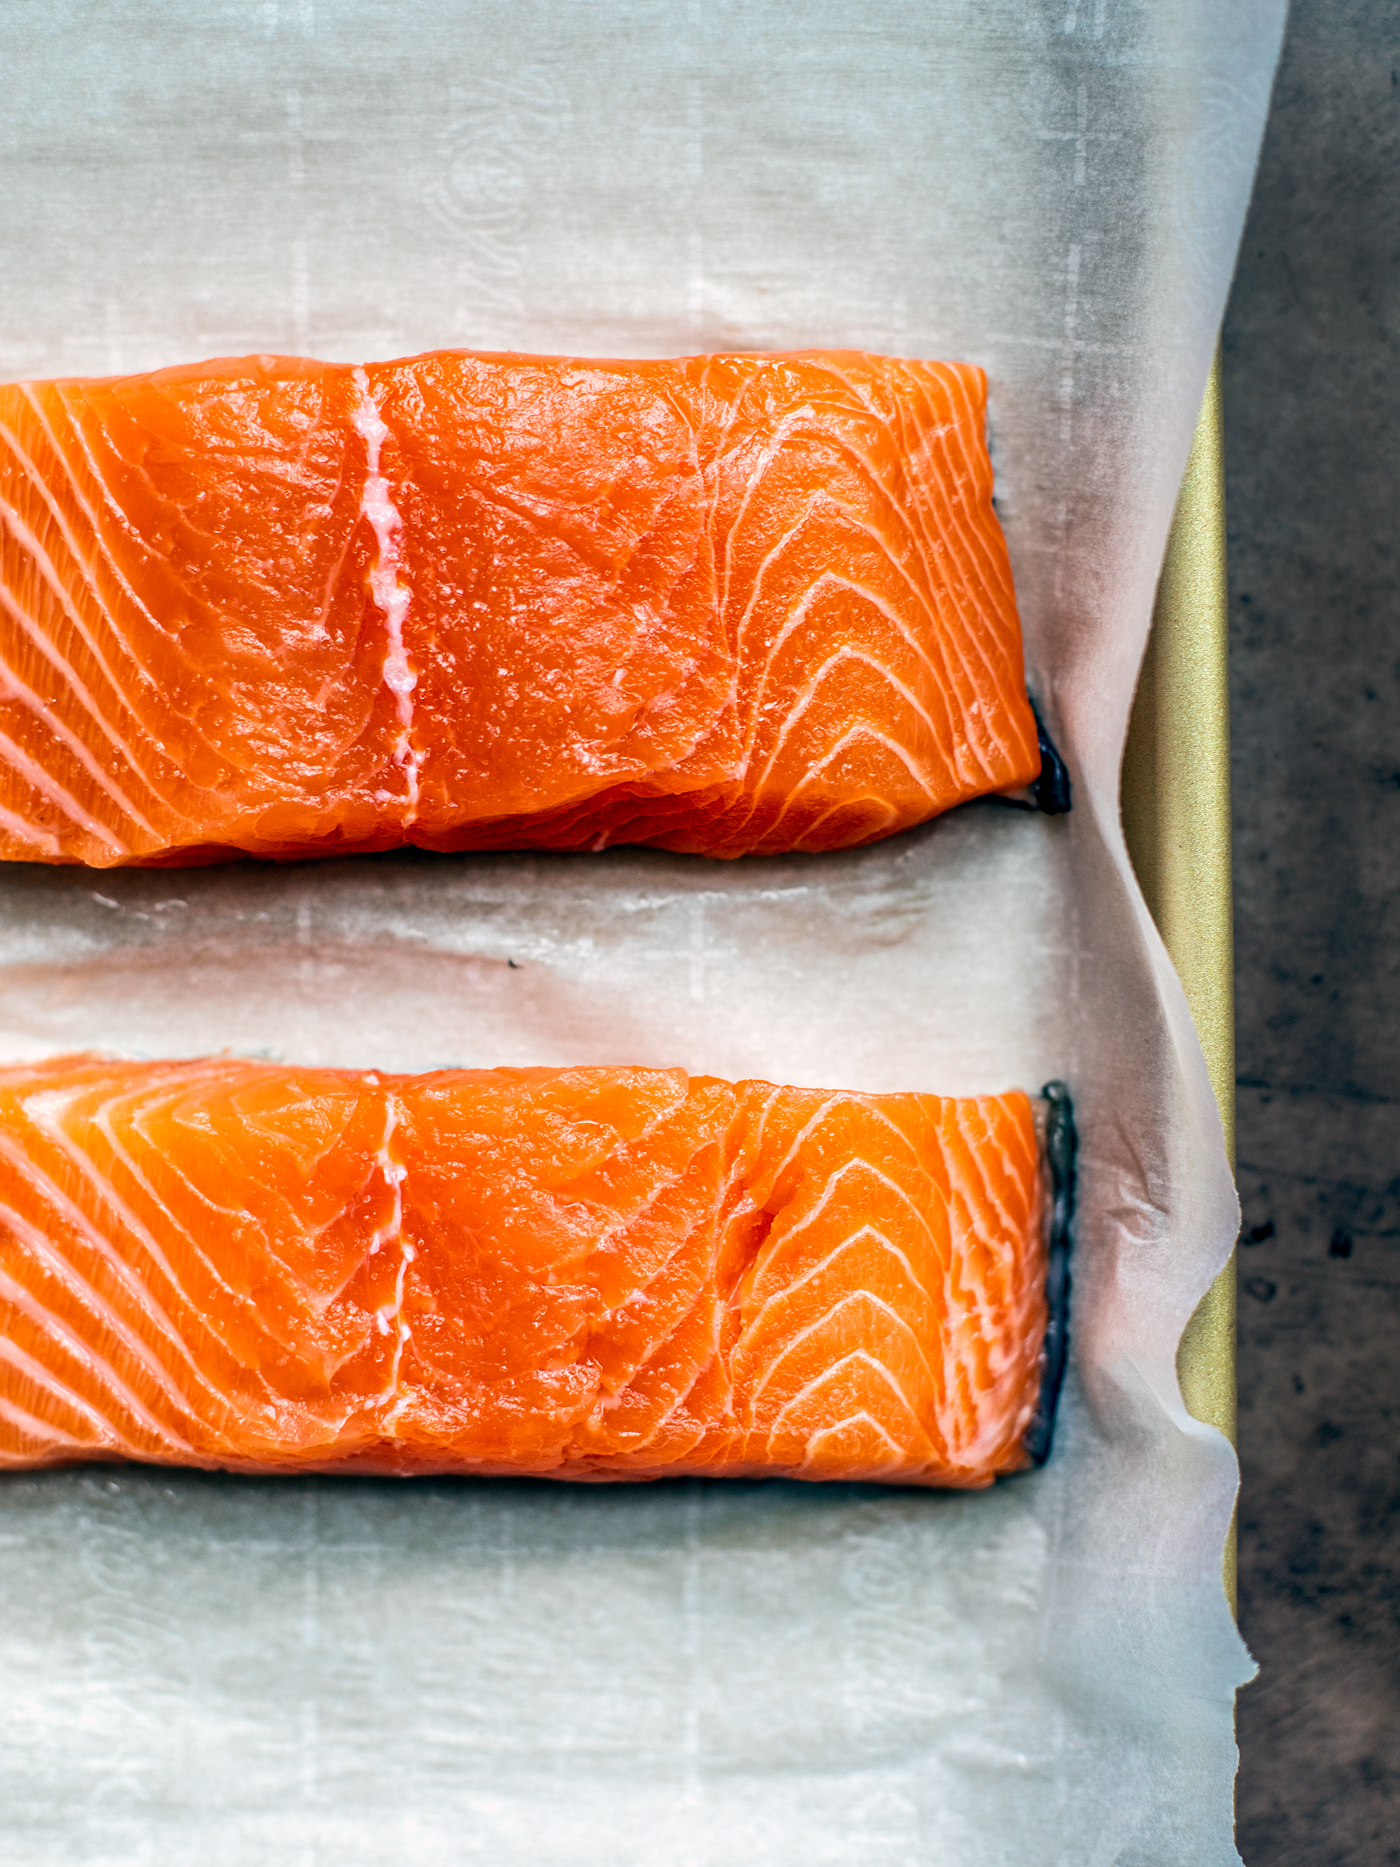 Two bright orange raw fillets of salmon on parchment-covered baking sheet.